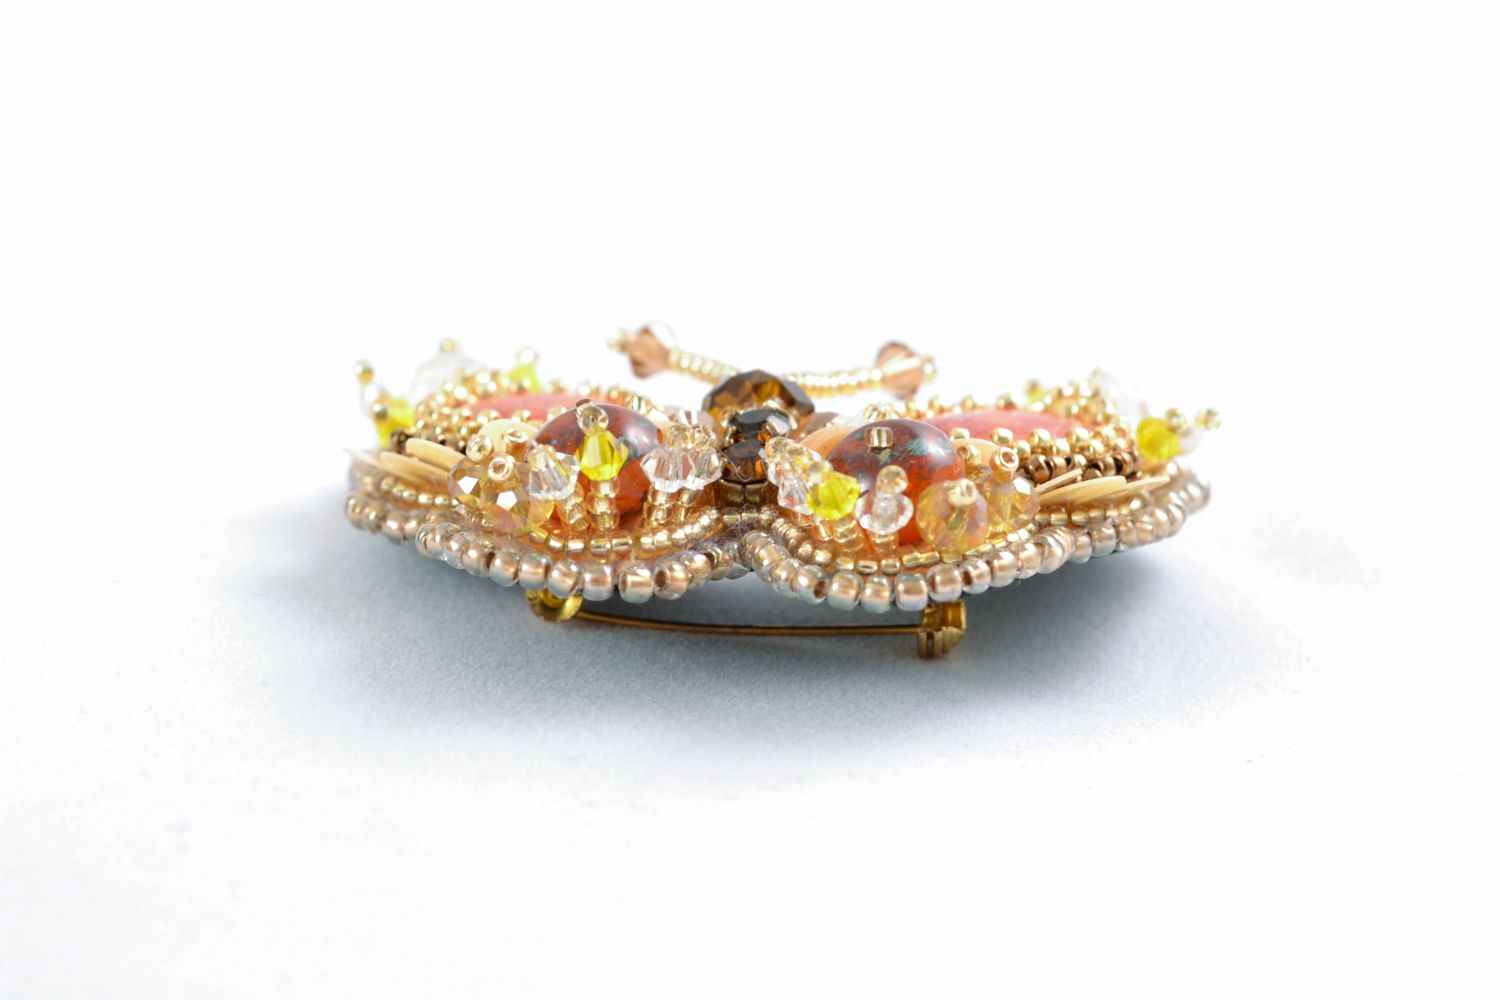 Handmade brooch embroidered with beads and natural stones photo 5